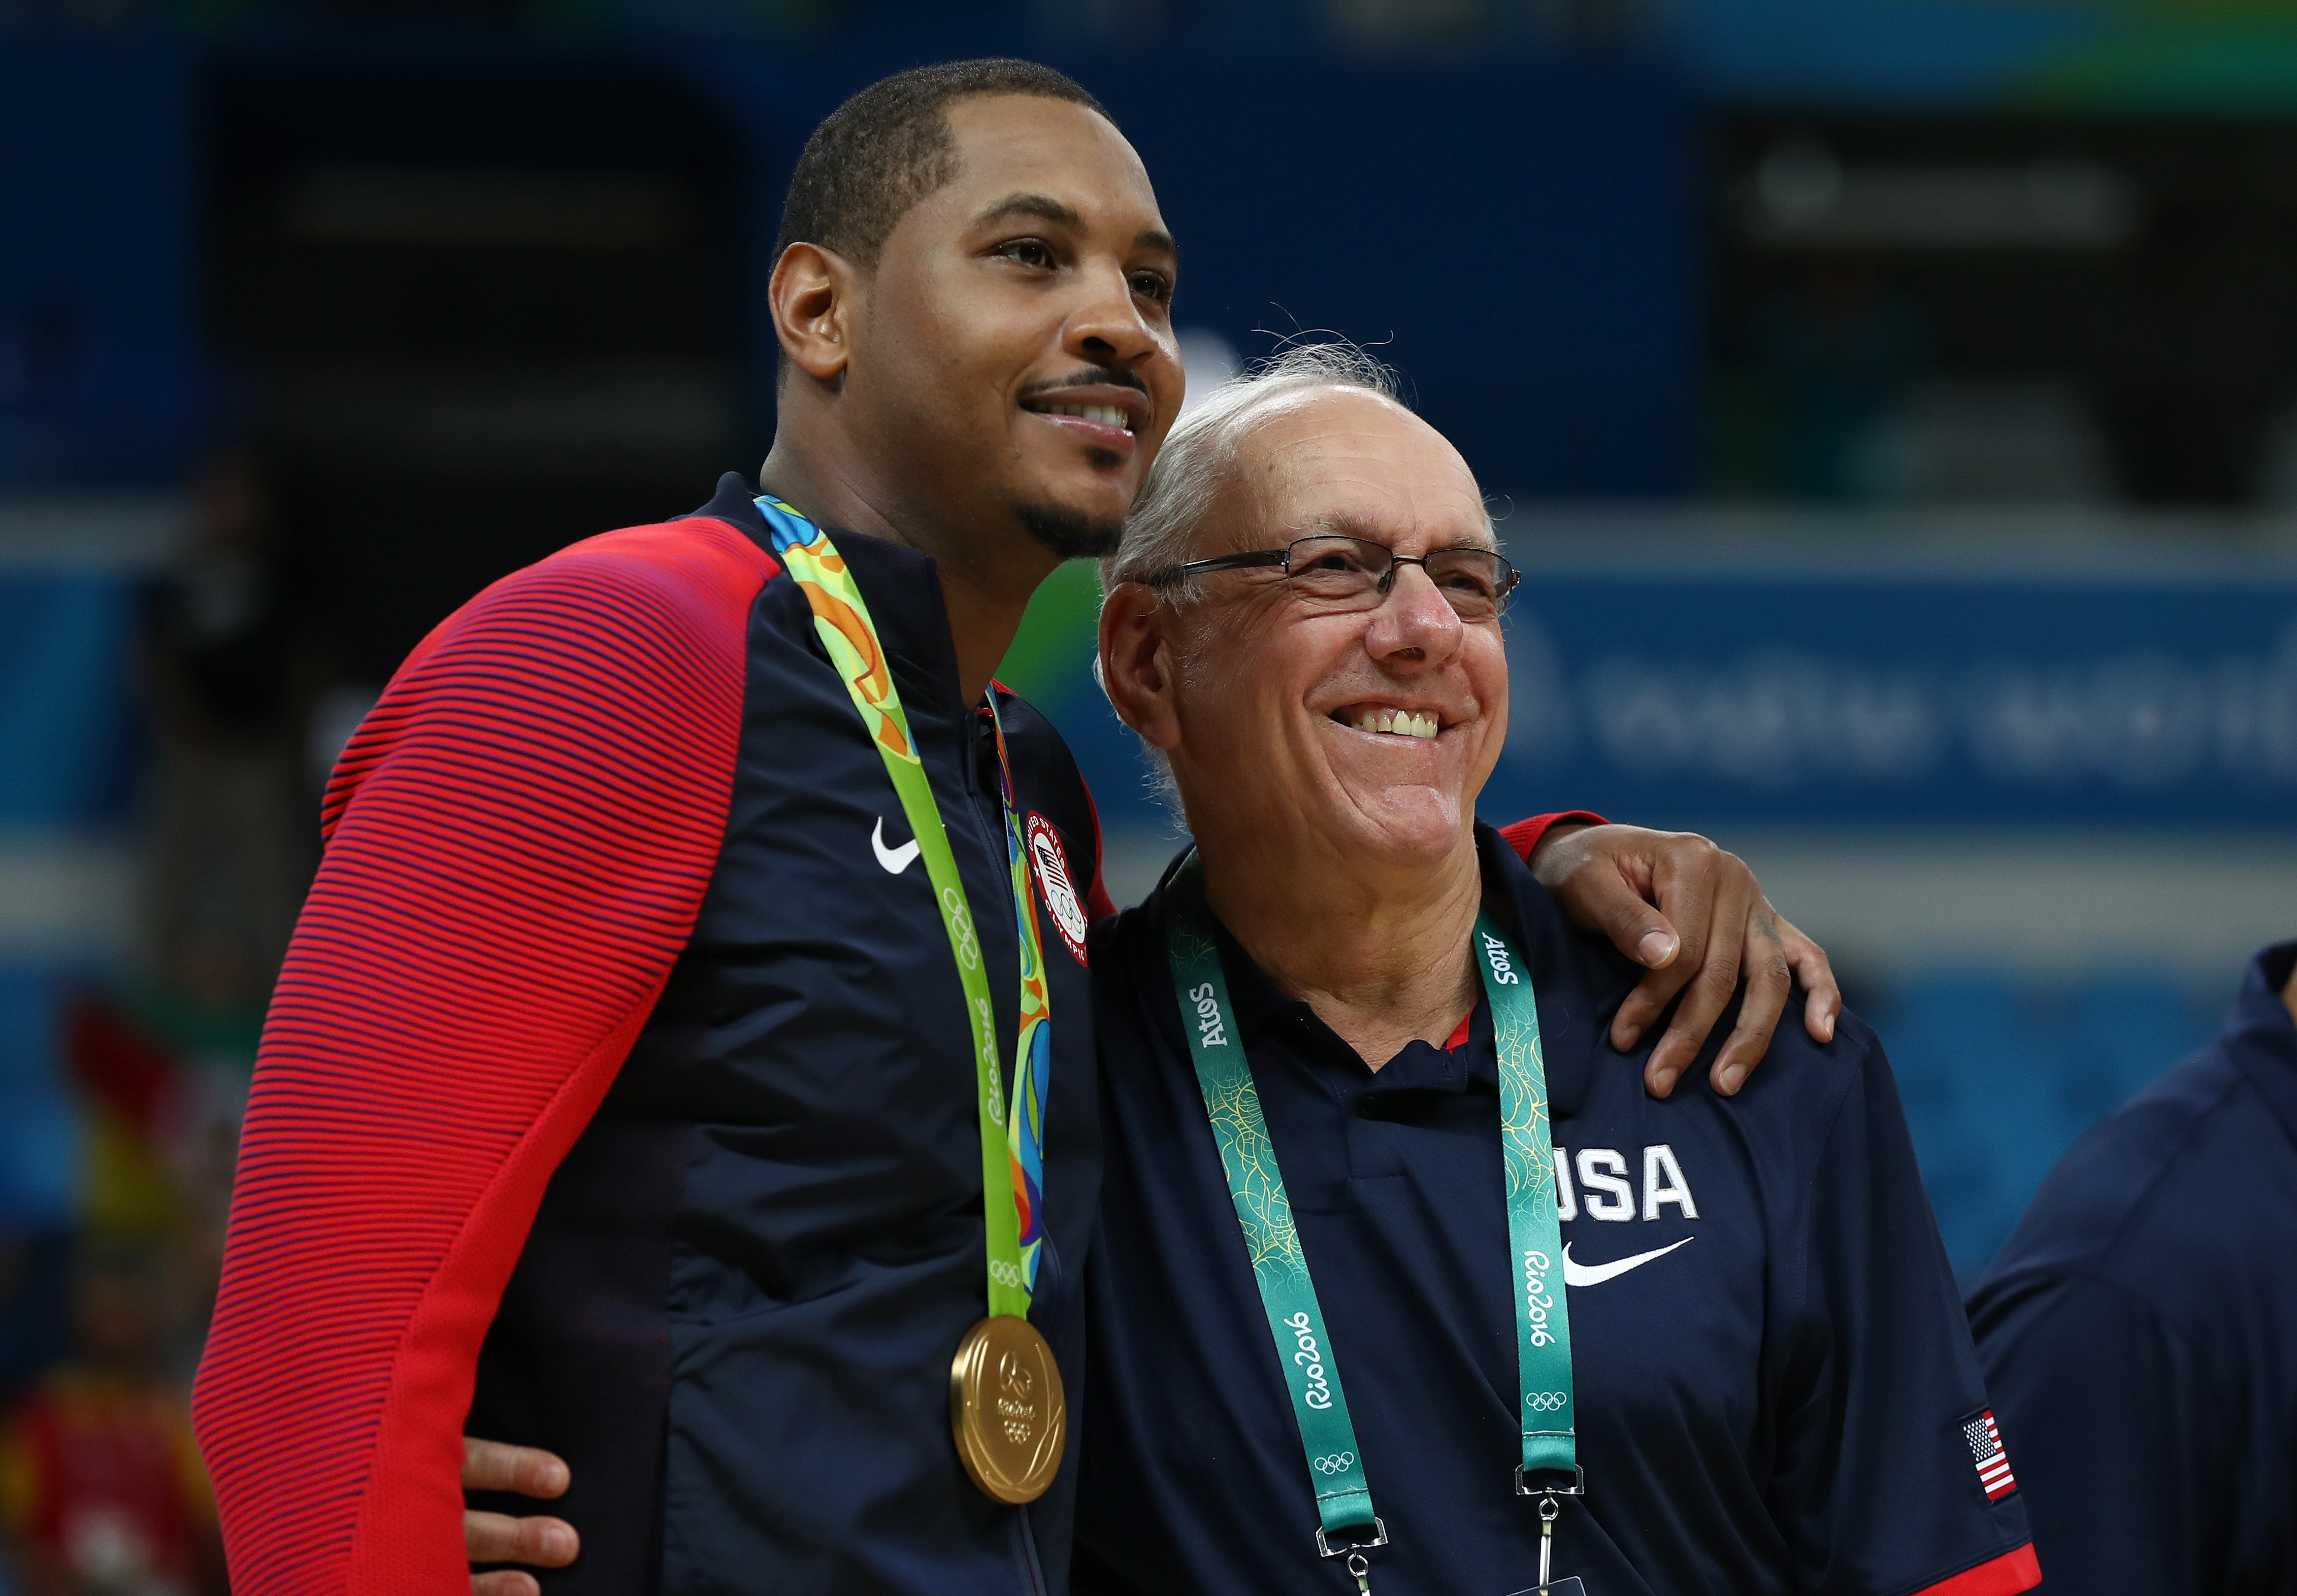 RIO DE JANEIRO, BRAZIL - AUGUST 21: Carmelo Anthony #15 of the United States poses with Team USA assistant coach Jim Boeheim after defeating Serbia in the Men's Gold medal game on Day 16 of the Rio 2016 Olympic Games at Carioca Arena 1 on August 21, 2016 in Rio de Janeiro, Brazil. (Photo by Elsa/Getty Images)